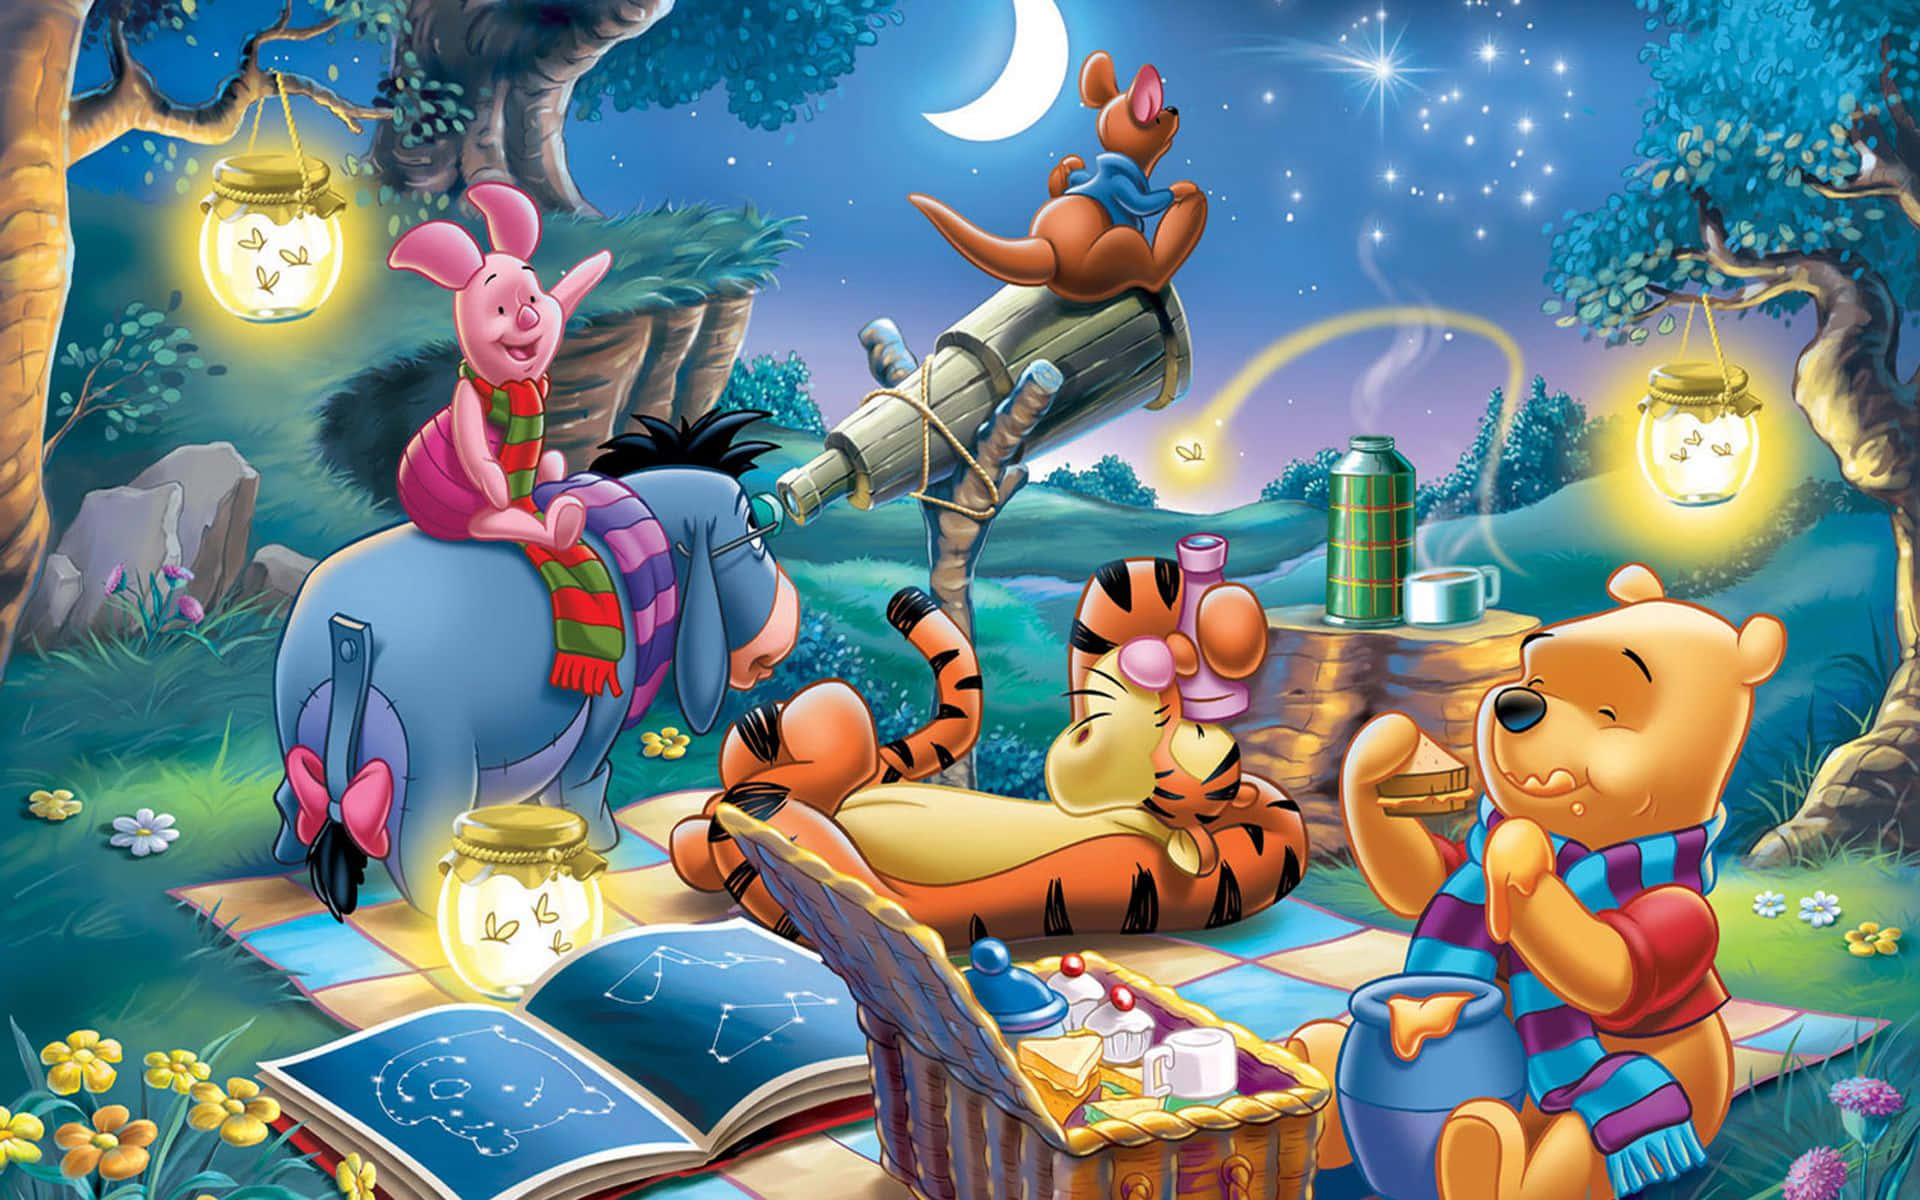 Get ready for a spook-tastic Halloween with Winnie the Pooh! Wallpaper